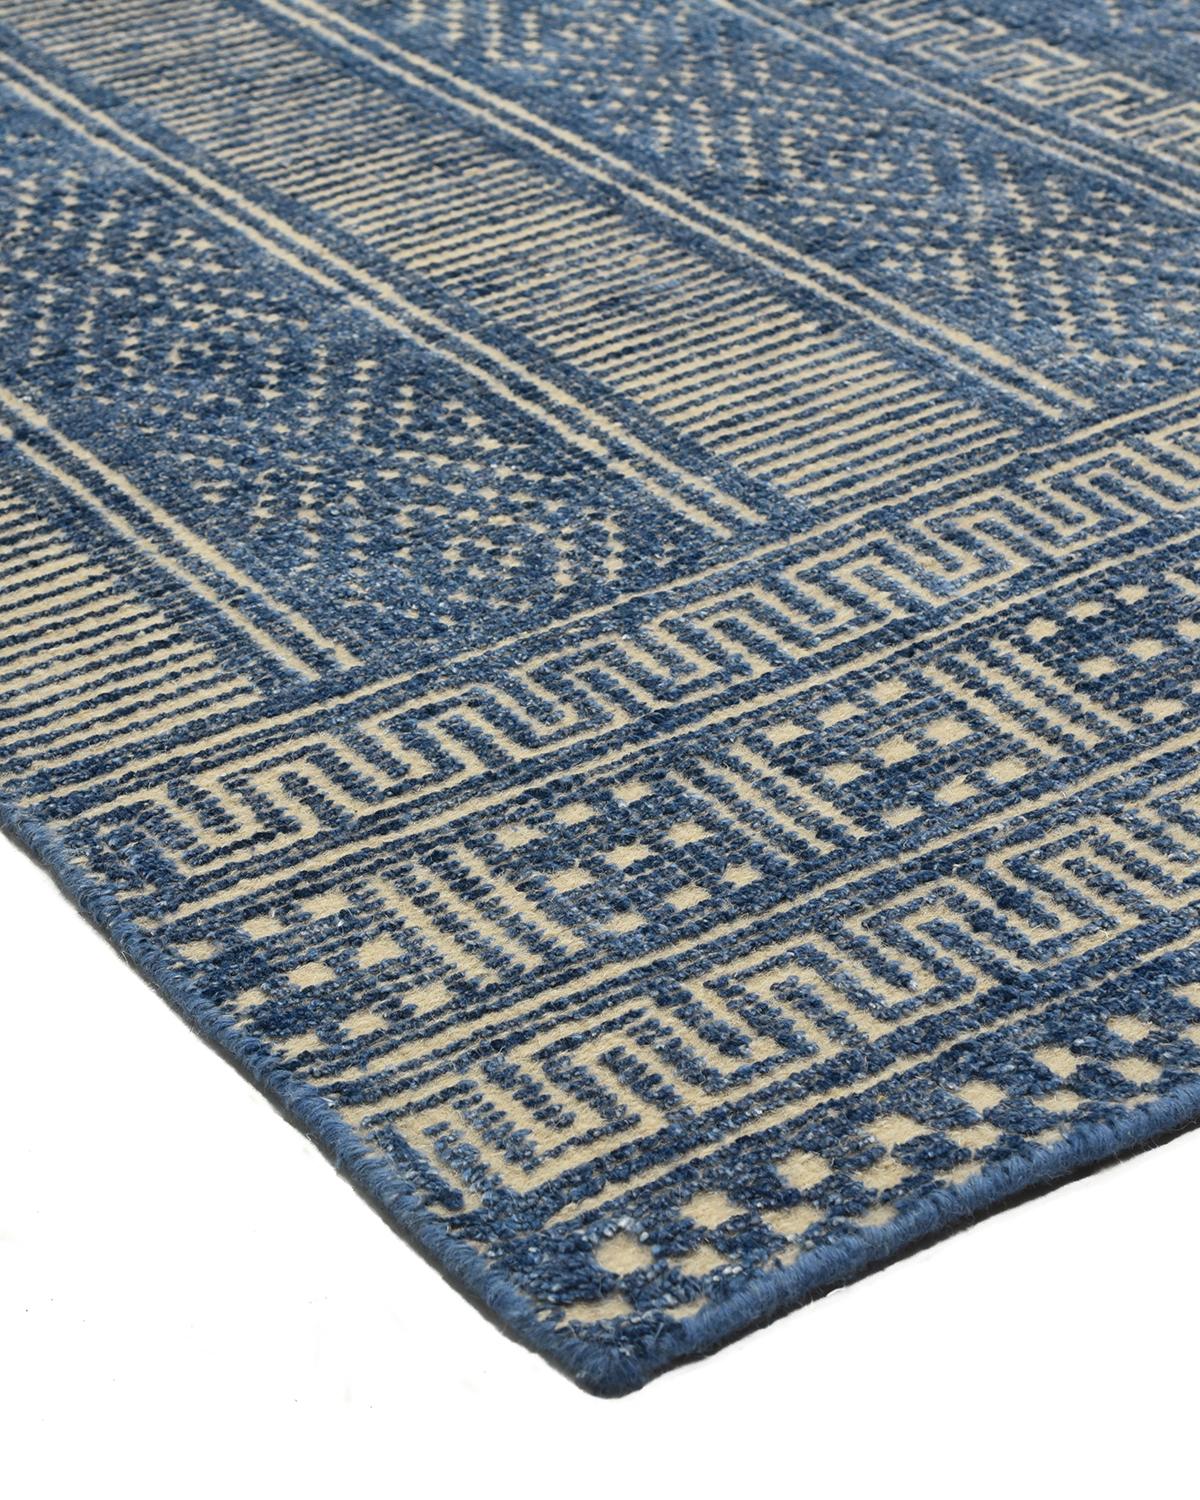 Using vintage-inspired designs and contemporary, neutral color stories and distressed detailing, the Jankat collection offers Classic elegance with a modern twist. Effortless, chic, and functional, this rug is perfect for adding a glamorous touch to